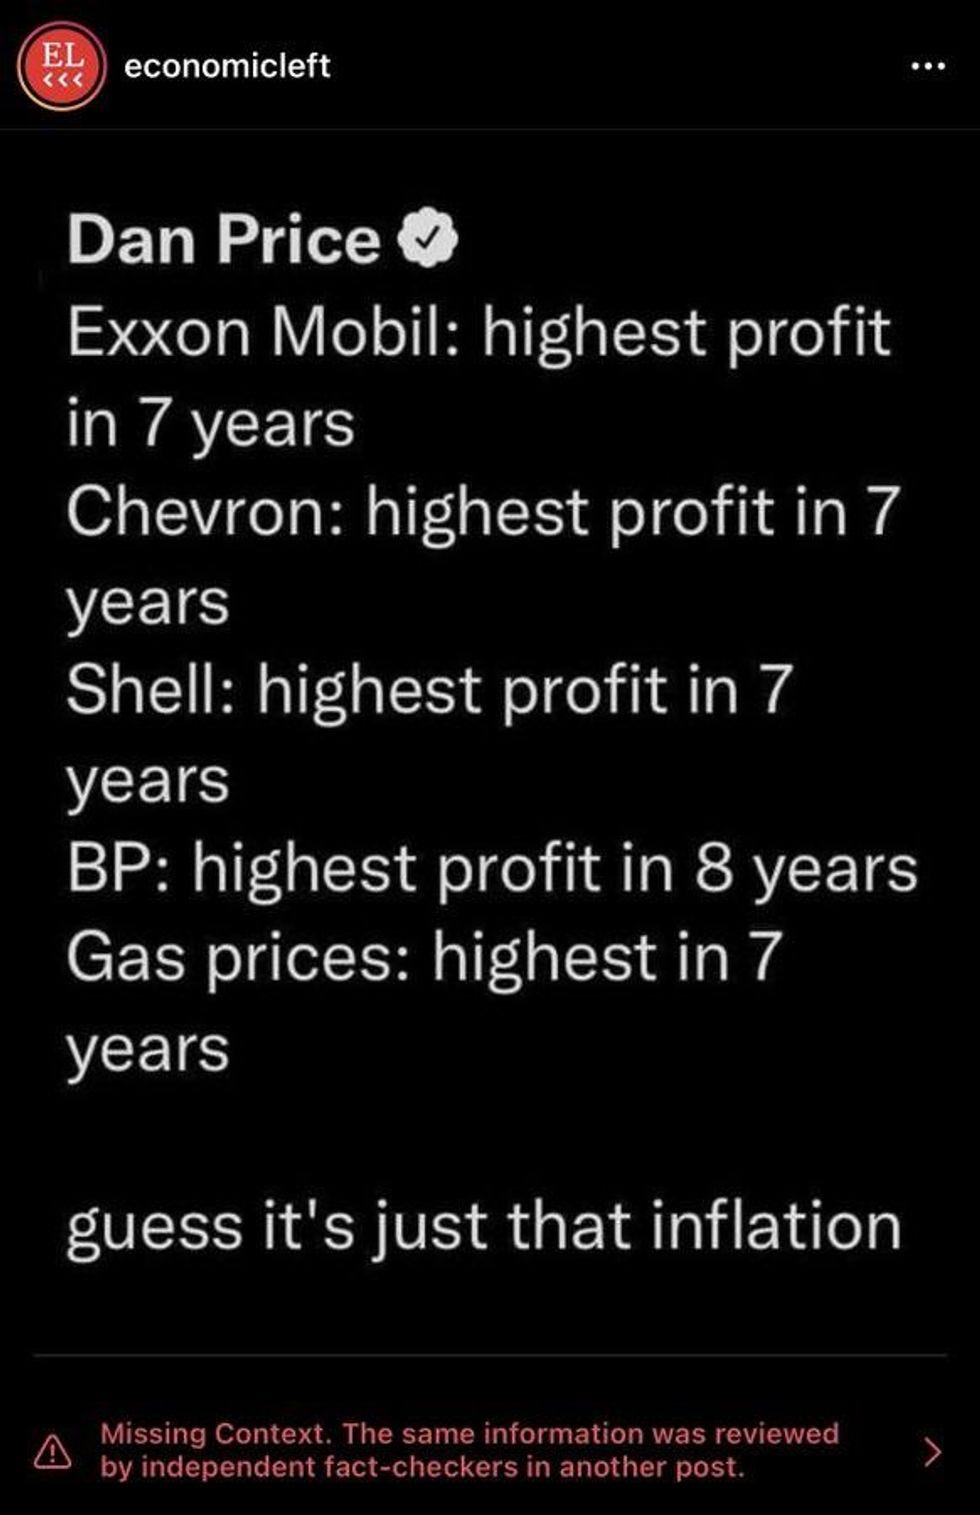 Instagram post: Exxon Mobil: highest profit in 7 years Chevron: highest profit in 7 years Shell: highest profit in 7 years BP: highest profit in 8 years Gas prices: highest in 7 years  guess it's just that inflation   Followed by warning from Instagram: Missing Context. The same information was reviewed by independent fact-checkers in another post.   